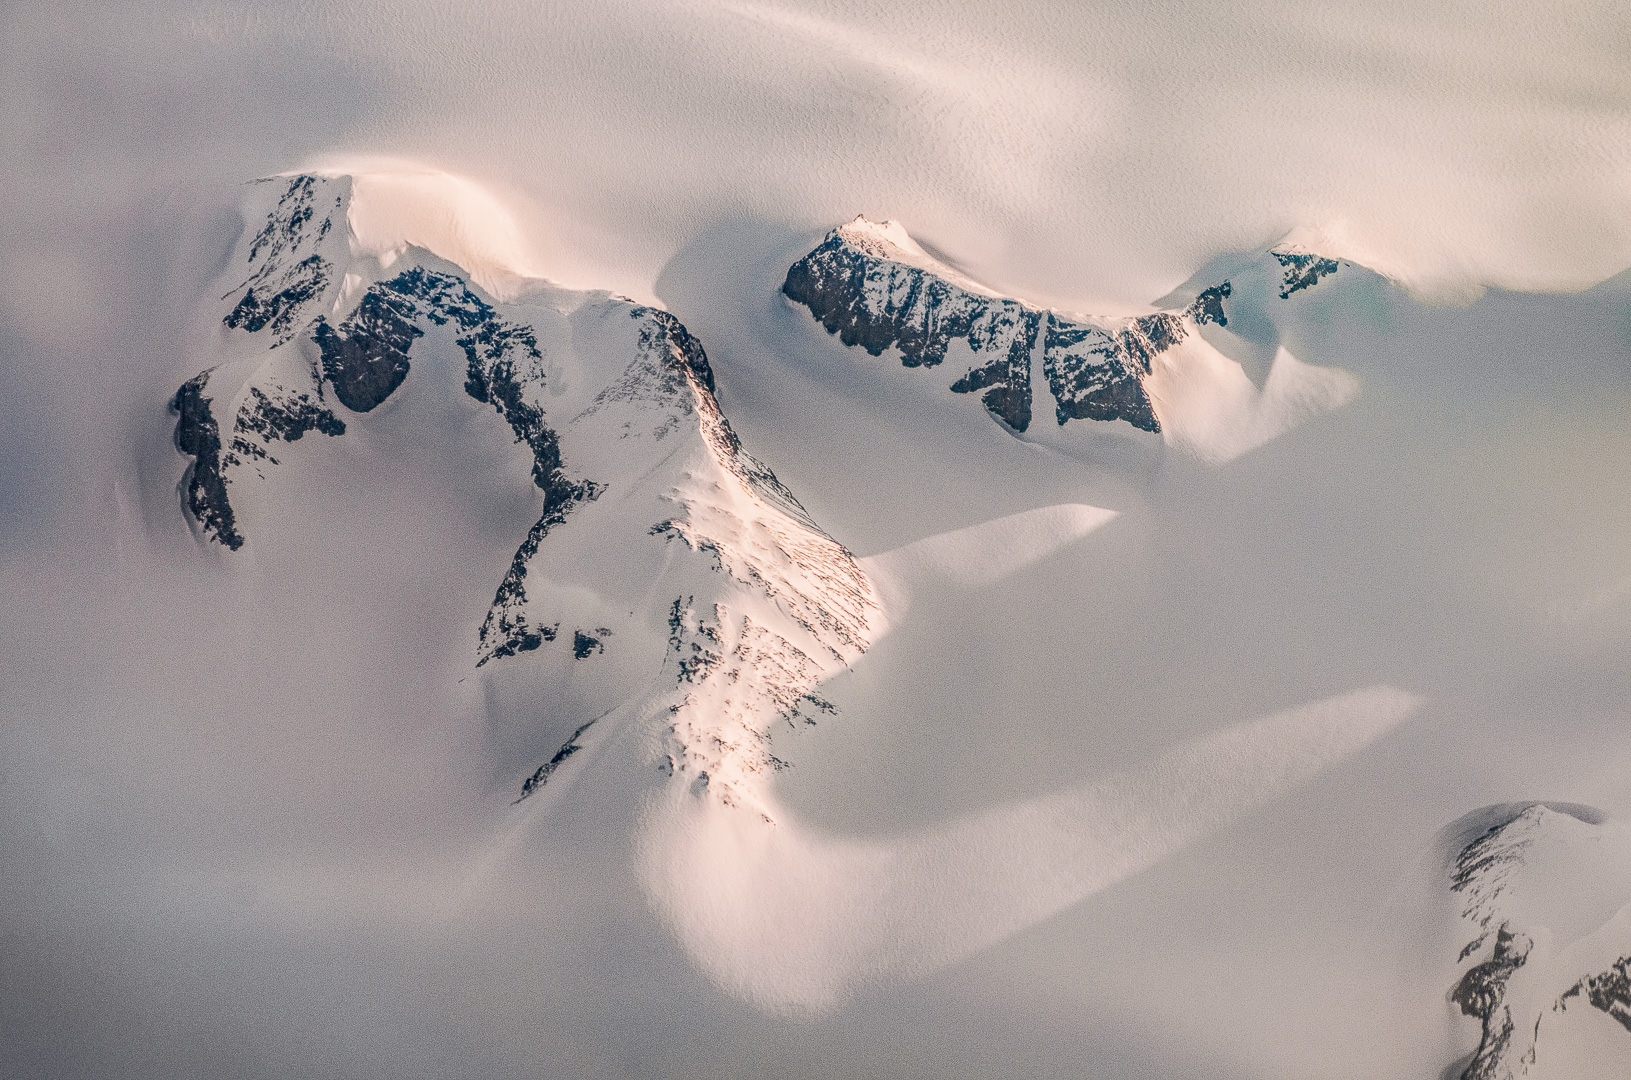 Greenland, ice cap, ice, snow, mountains, aerial image